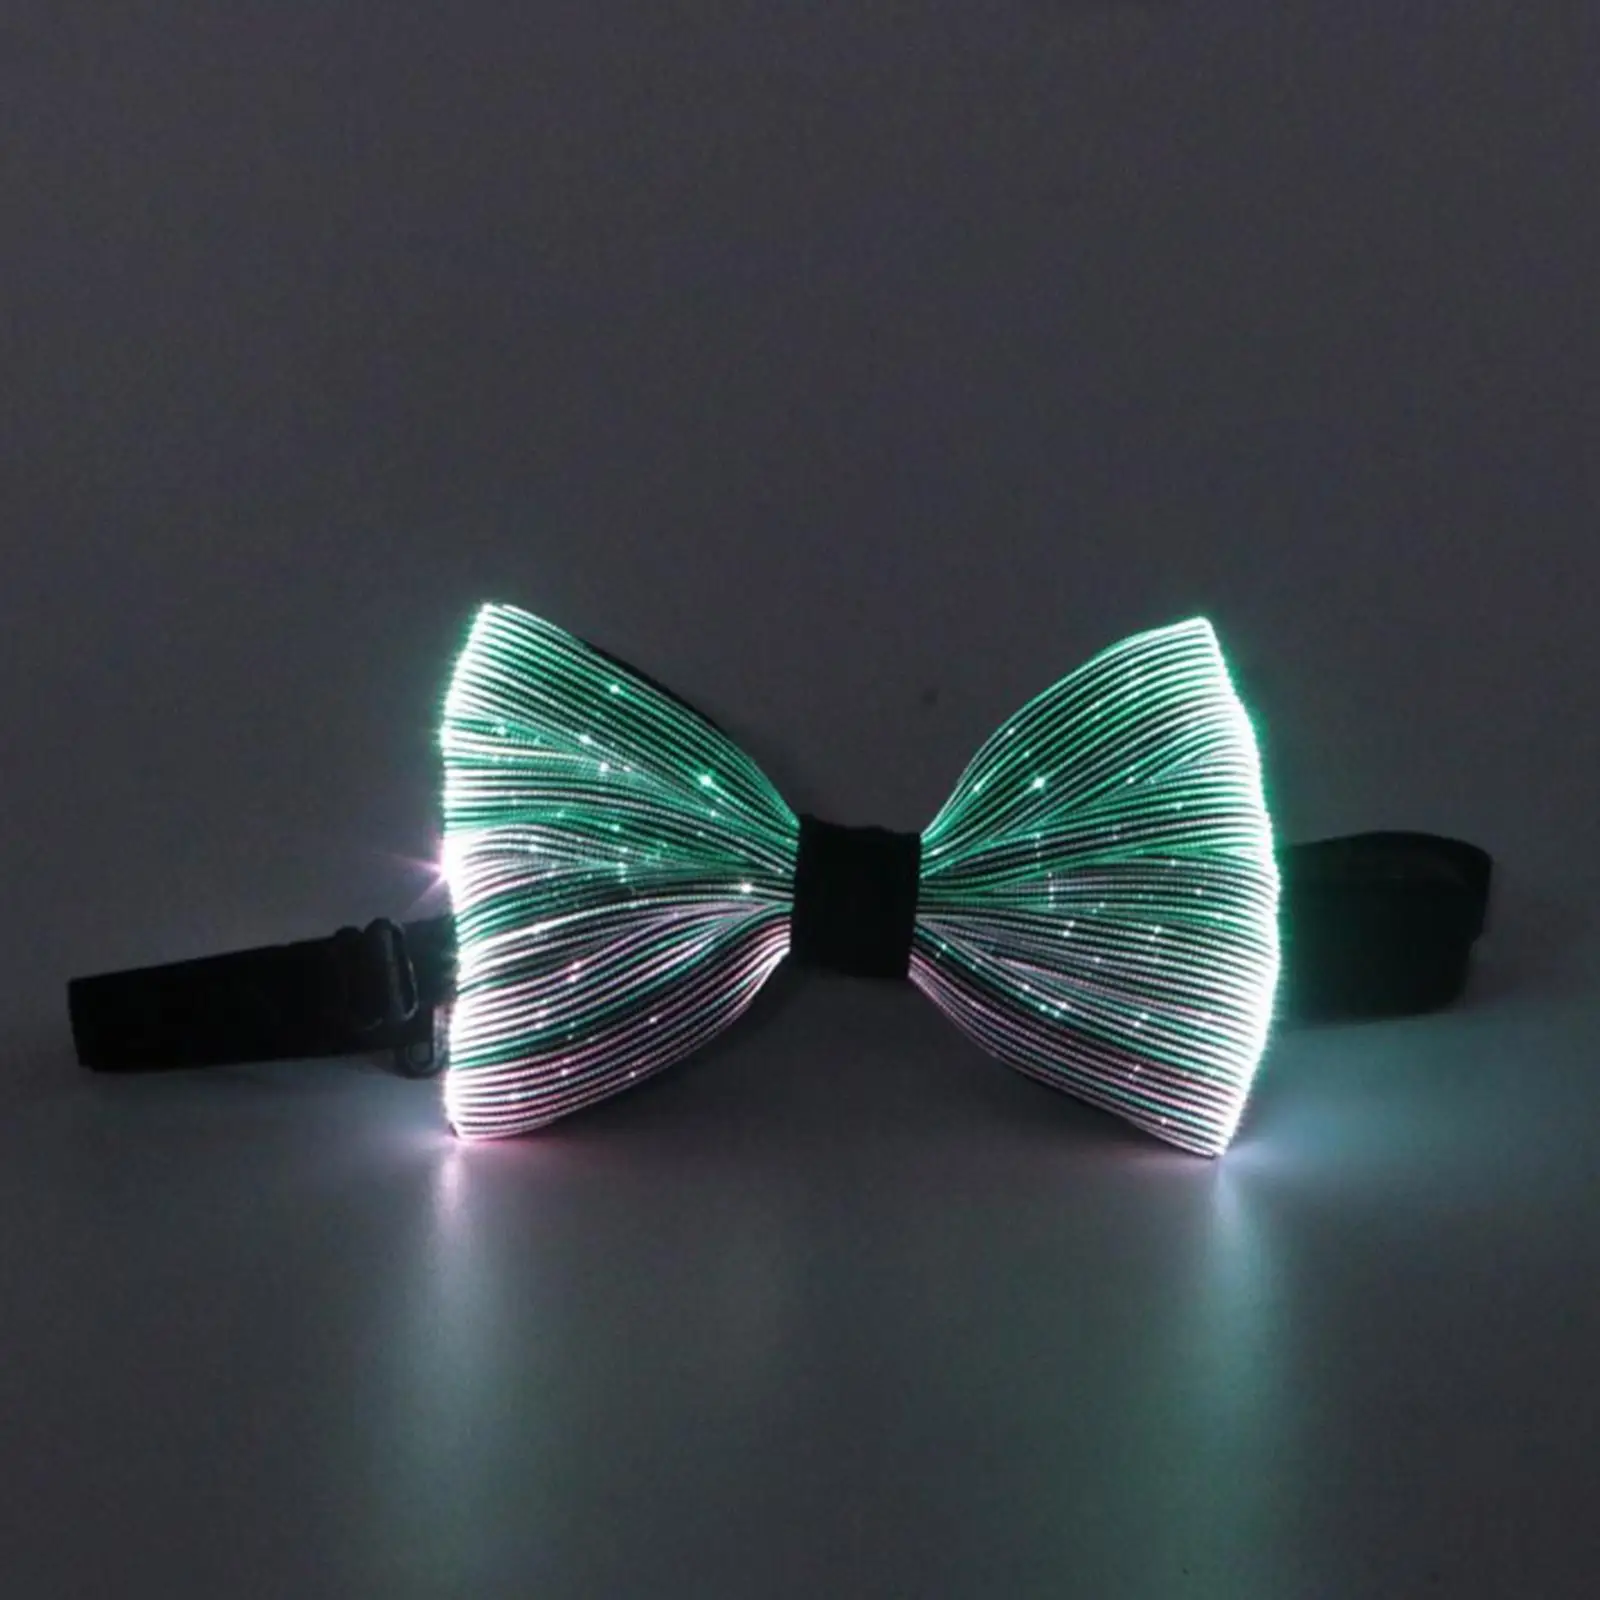 Rechargeable Lighting Bowties Glowing Ties Luminous Bow Tie for Club